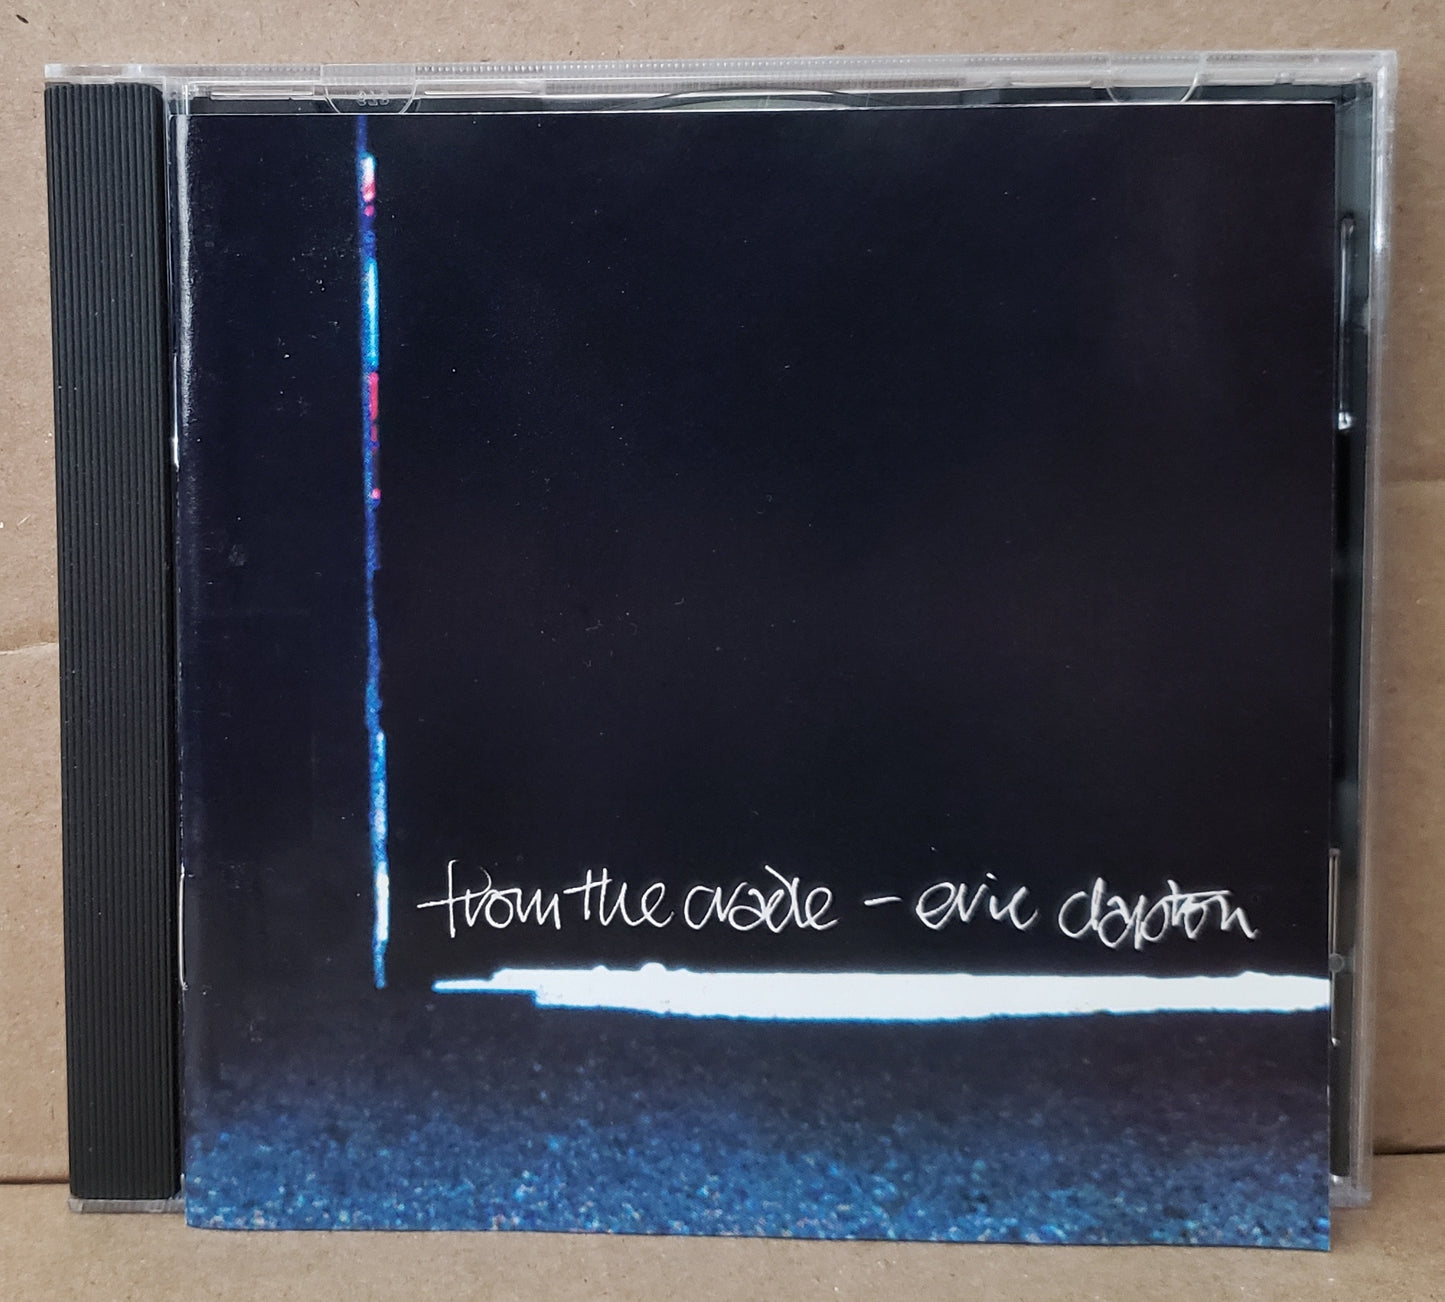 Eric Clapton - From the Cradle [1994 Allied] [Used CD]